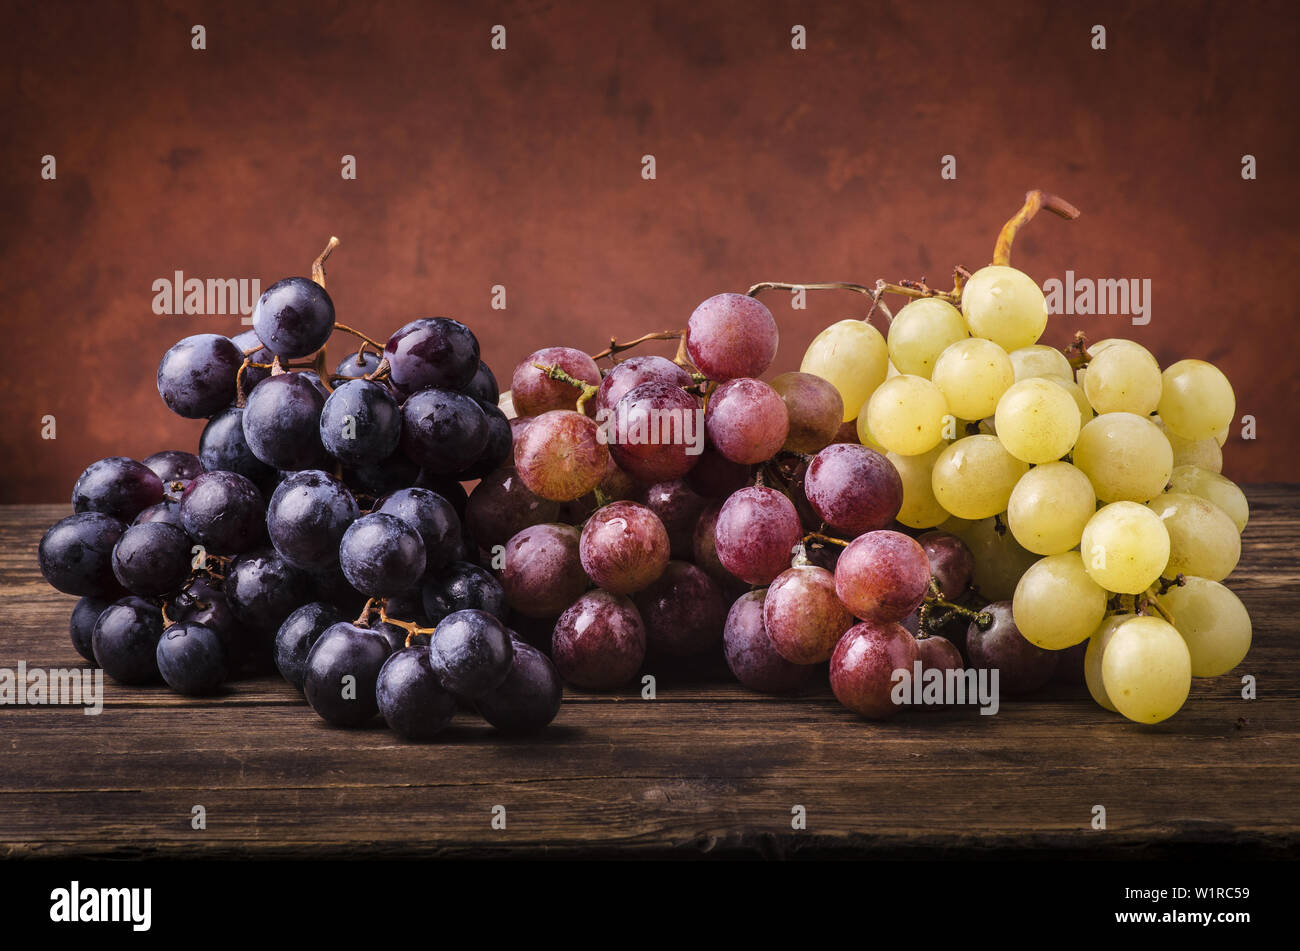 bunches of grapes of different types on a rough wooden table Stock Photo